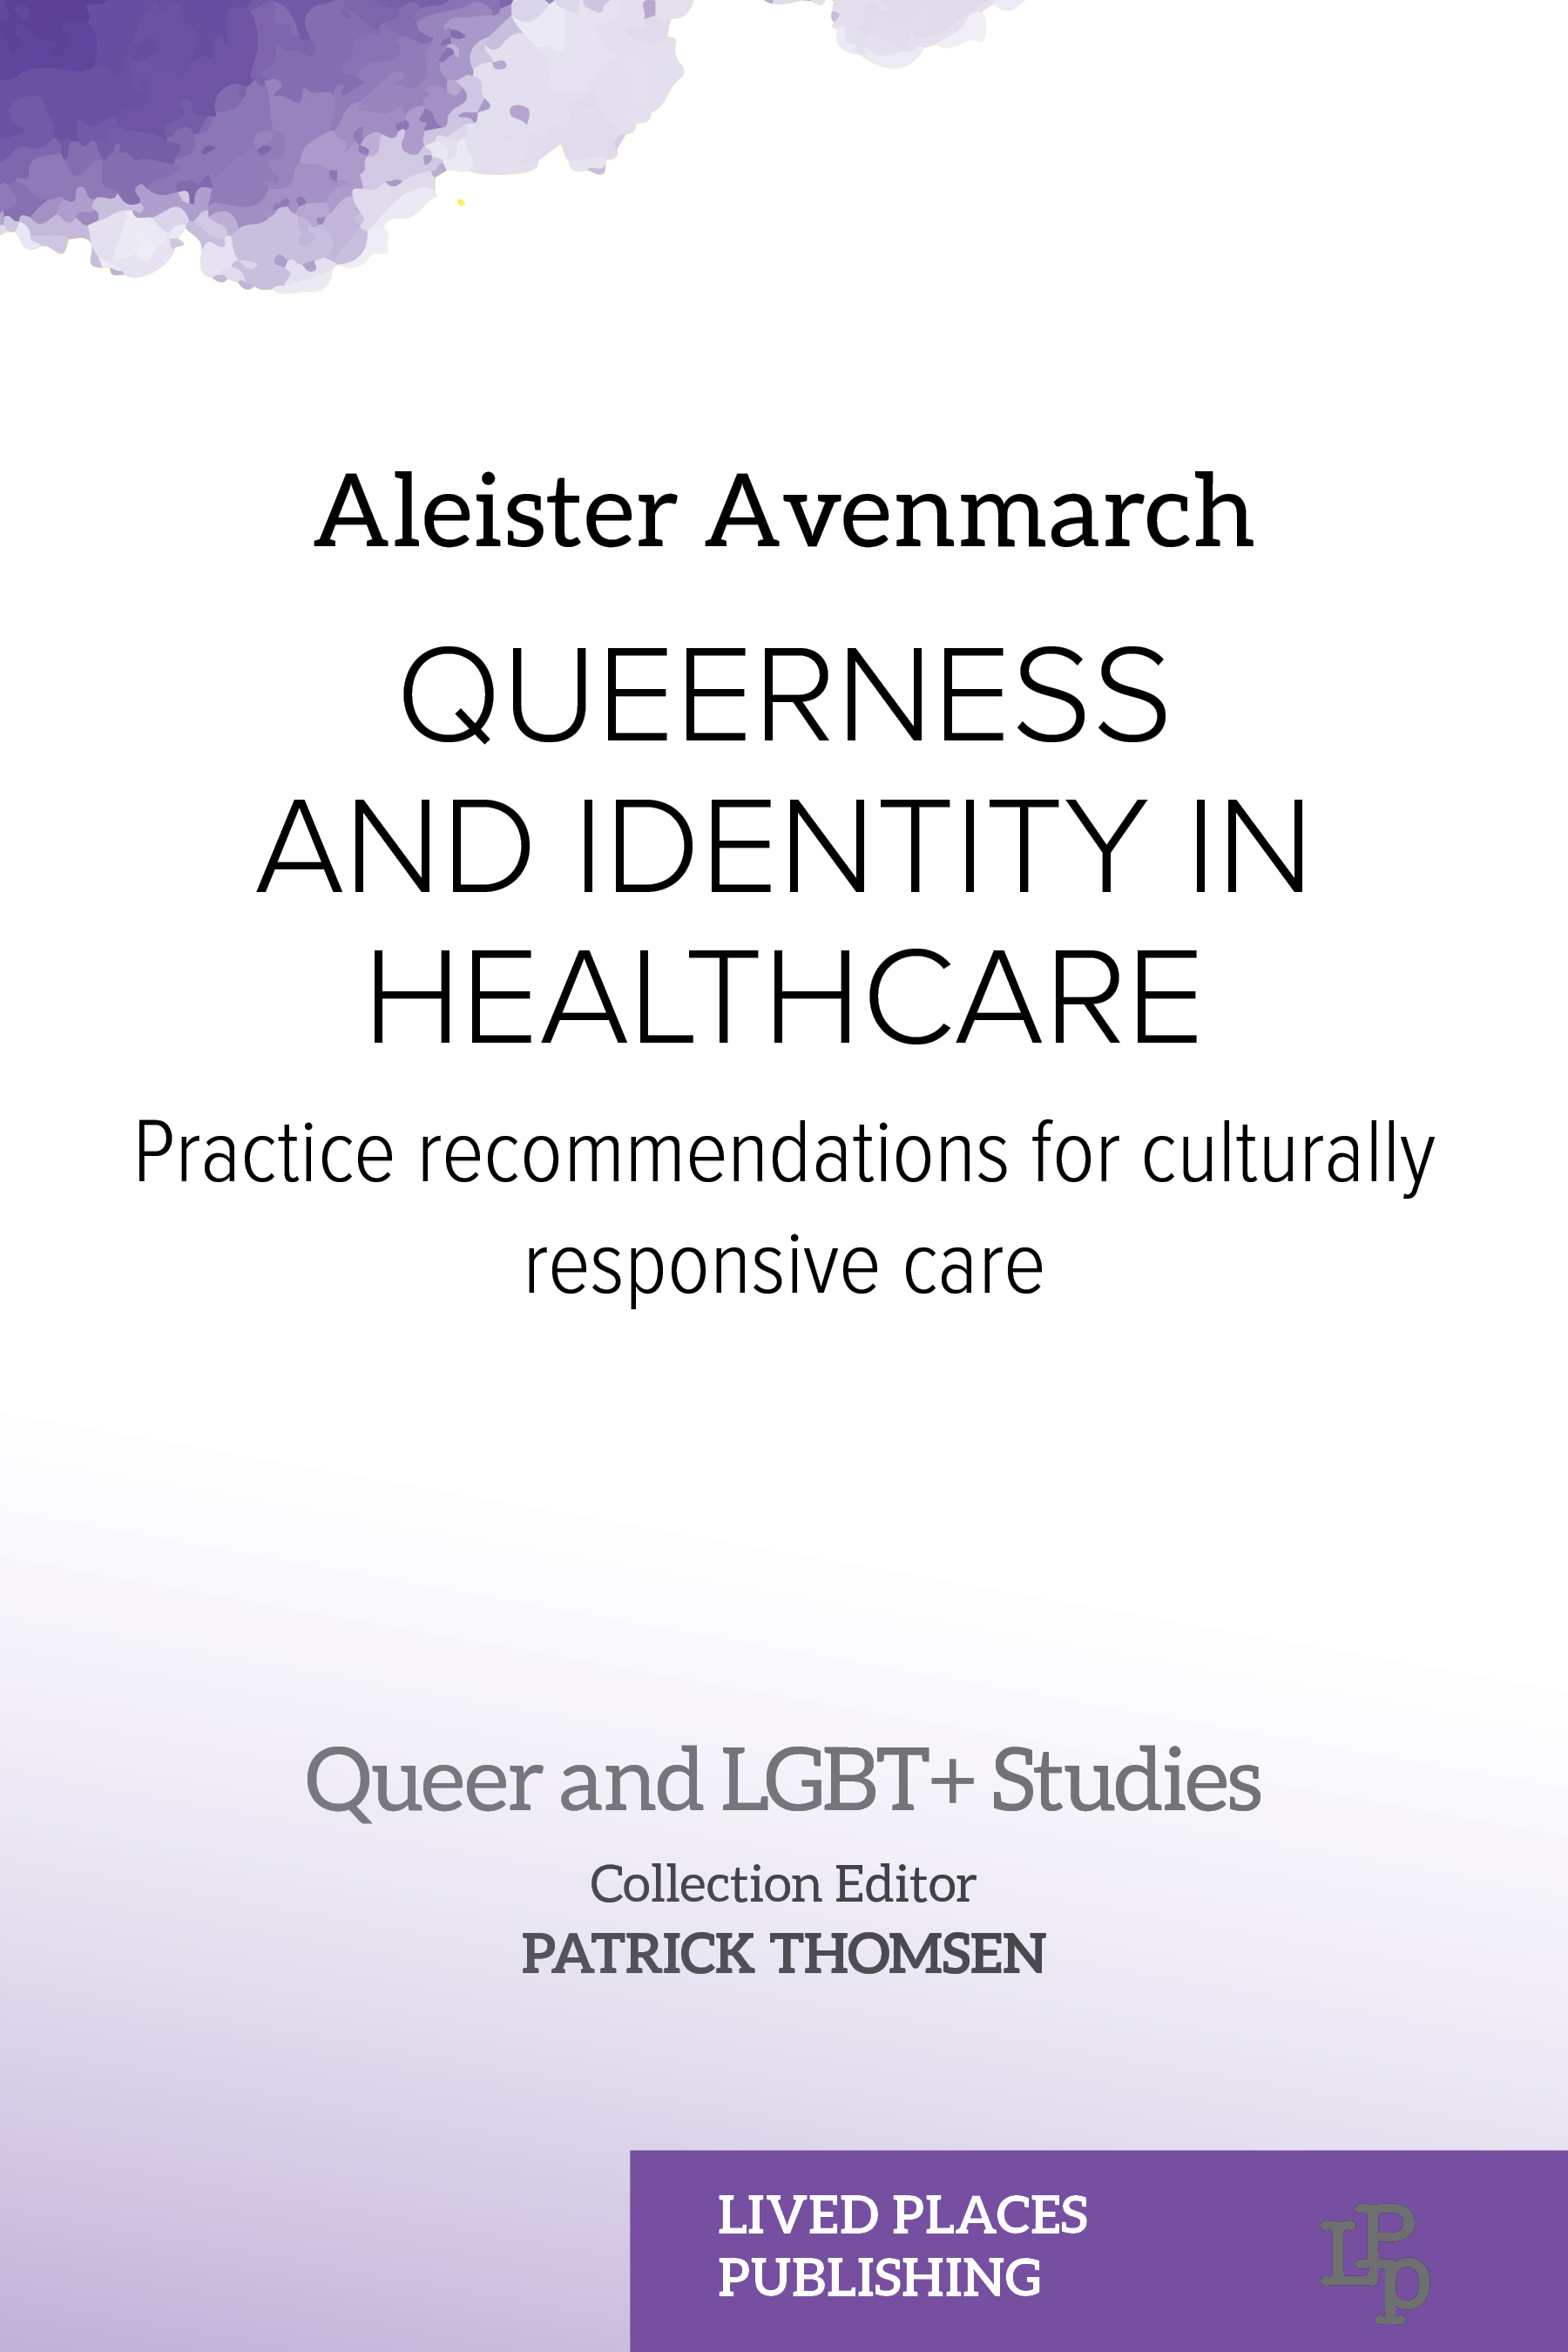 Queer and LGBT+ Studies